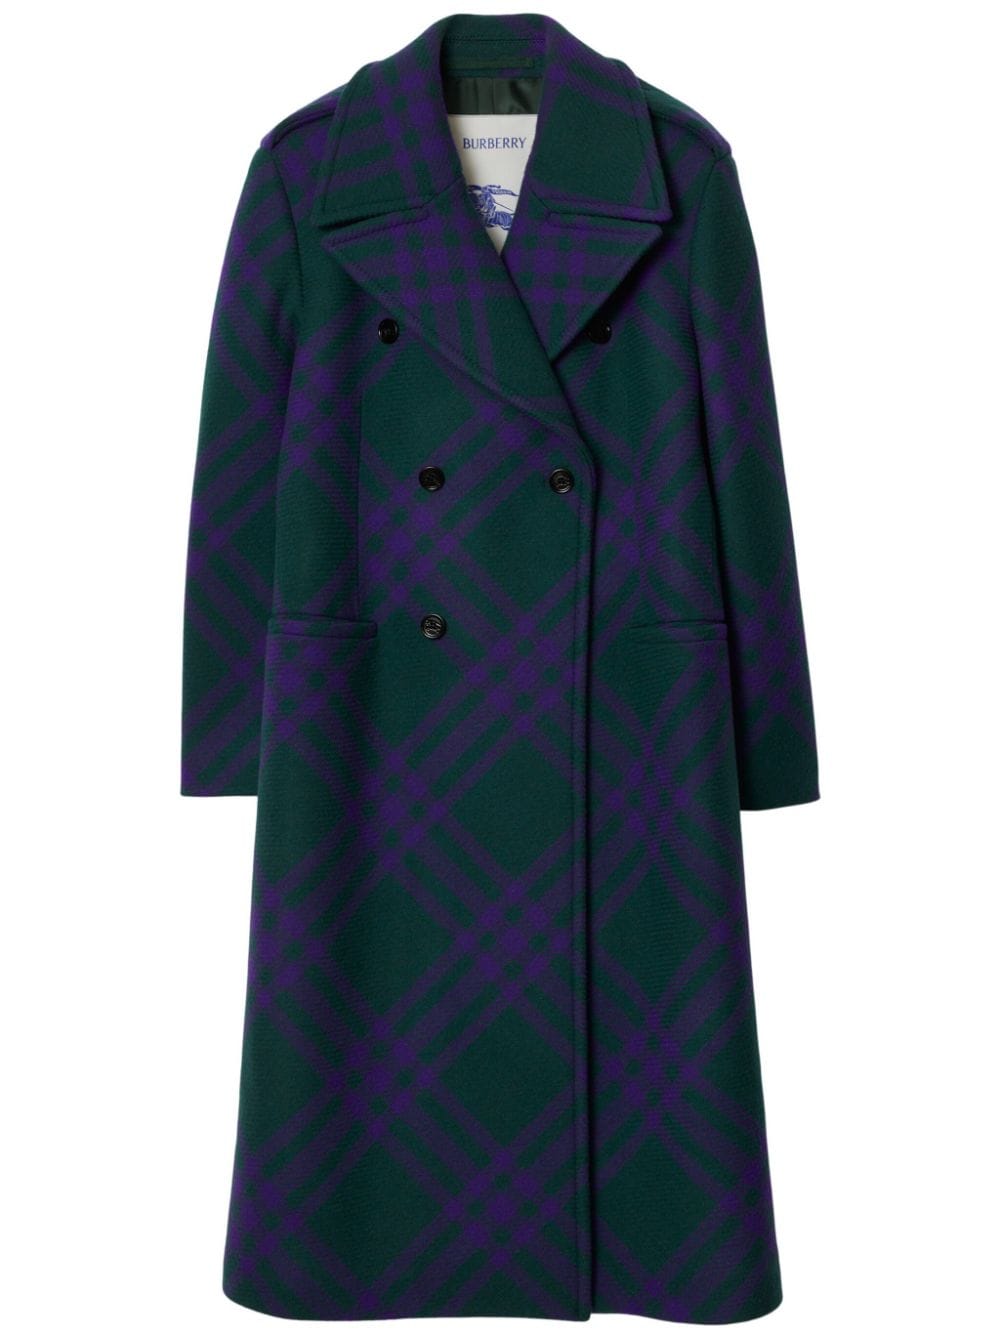 Burberry check-pattern double-breasted coat - Blue